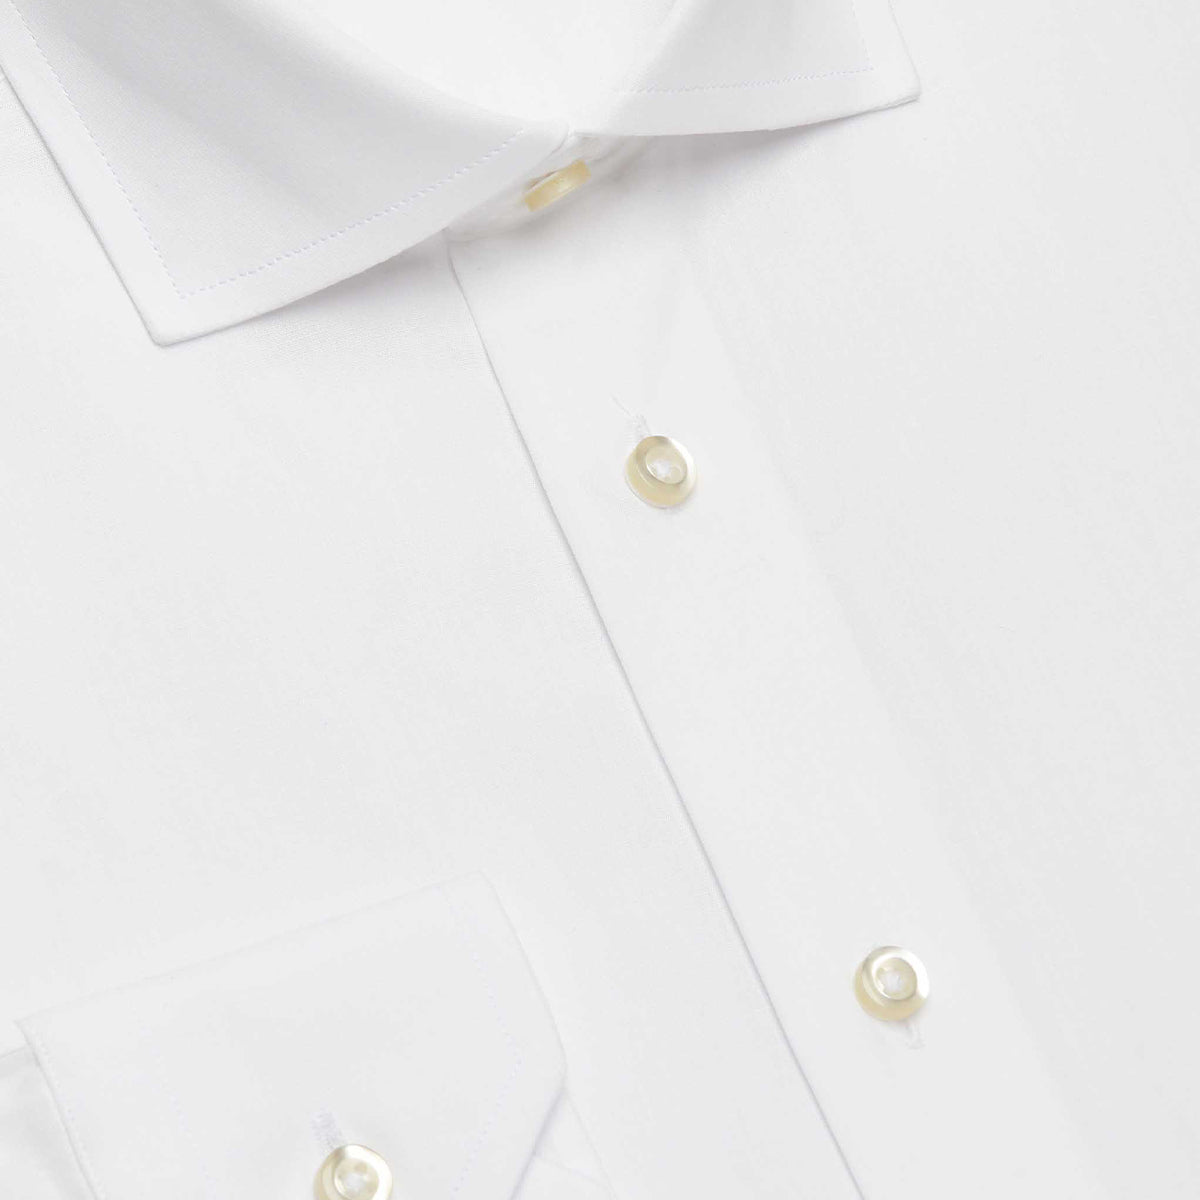 Camicissima Taormina Permanent White Fitted Shirt Taormina Francese | LEVISONS